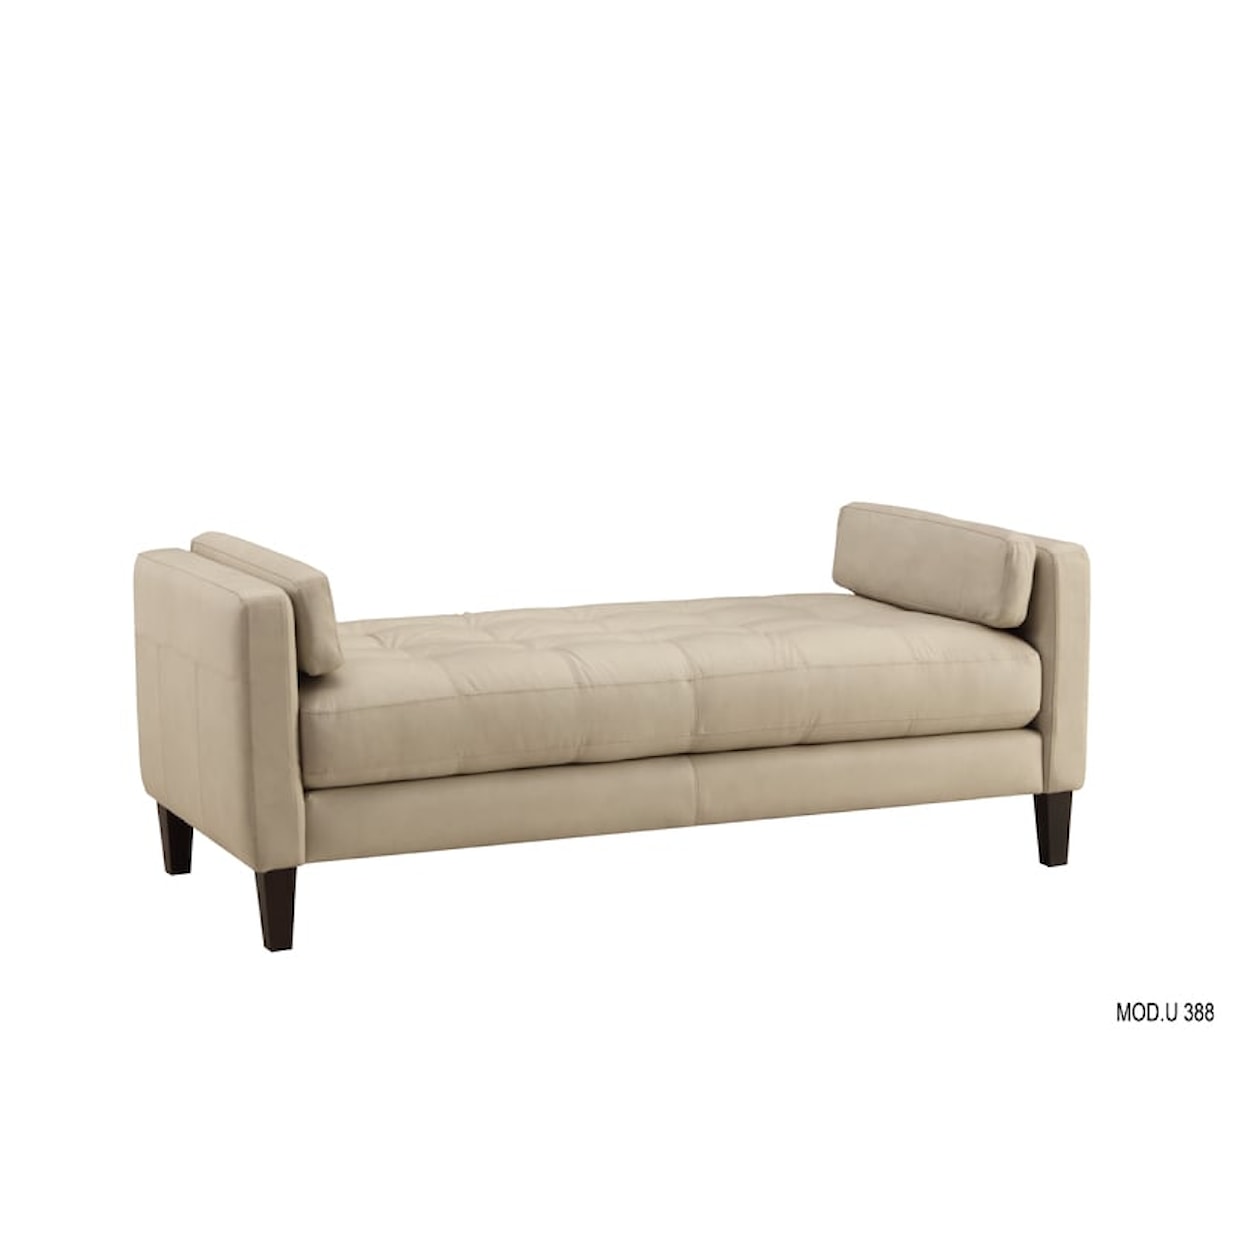 Chateau D'Ax U388 Leather Bench